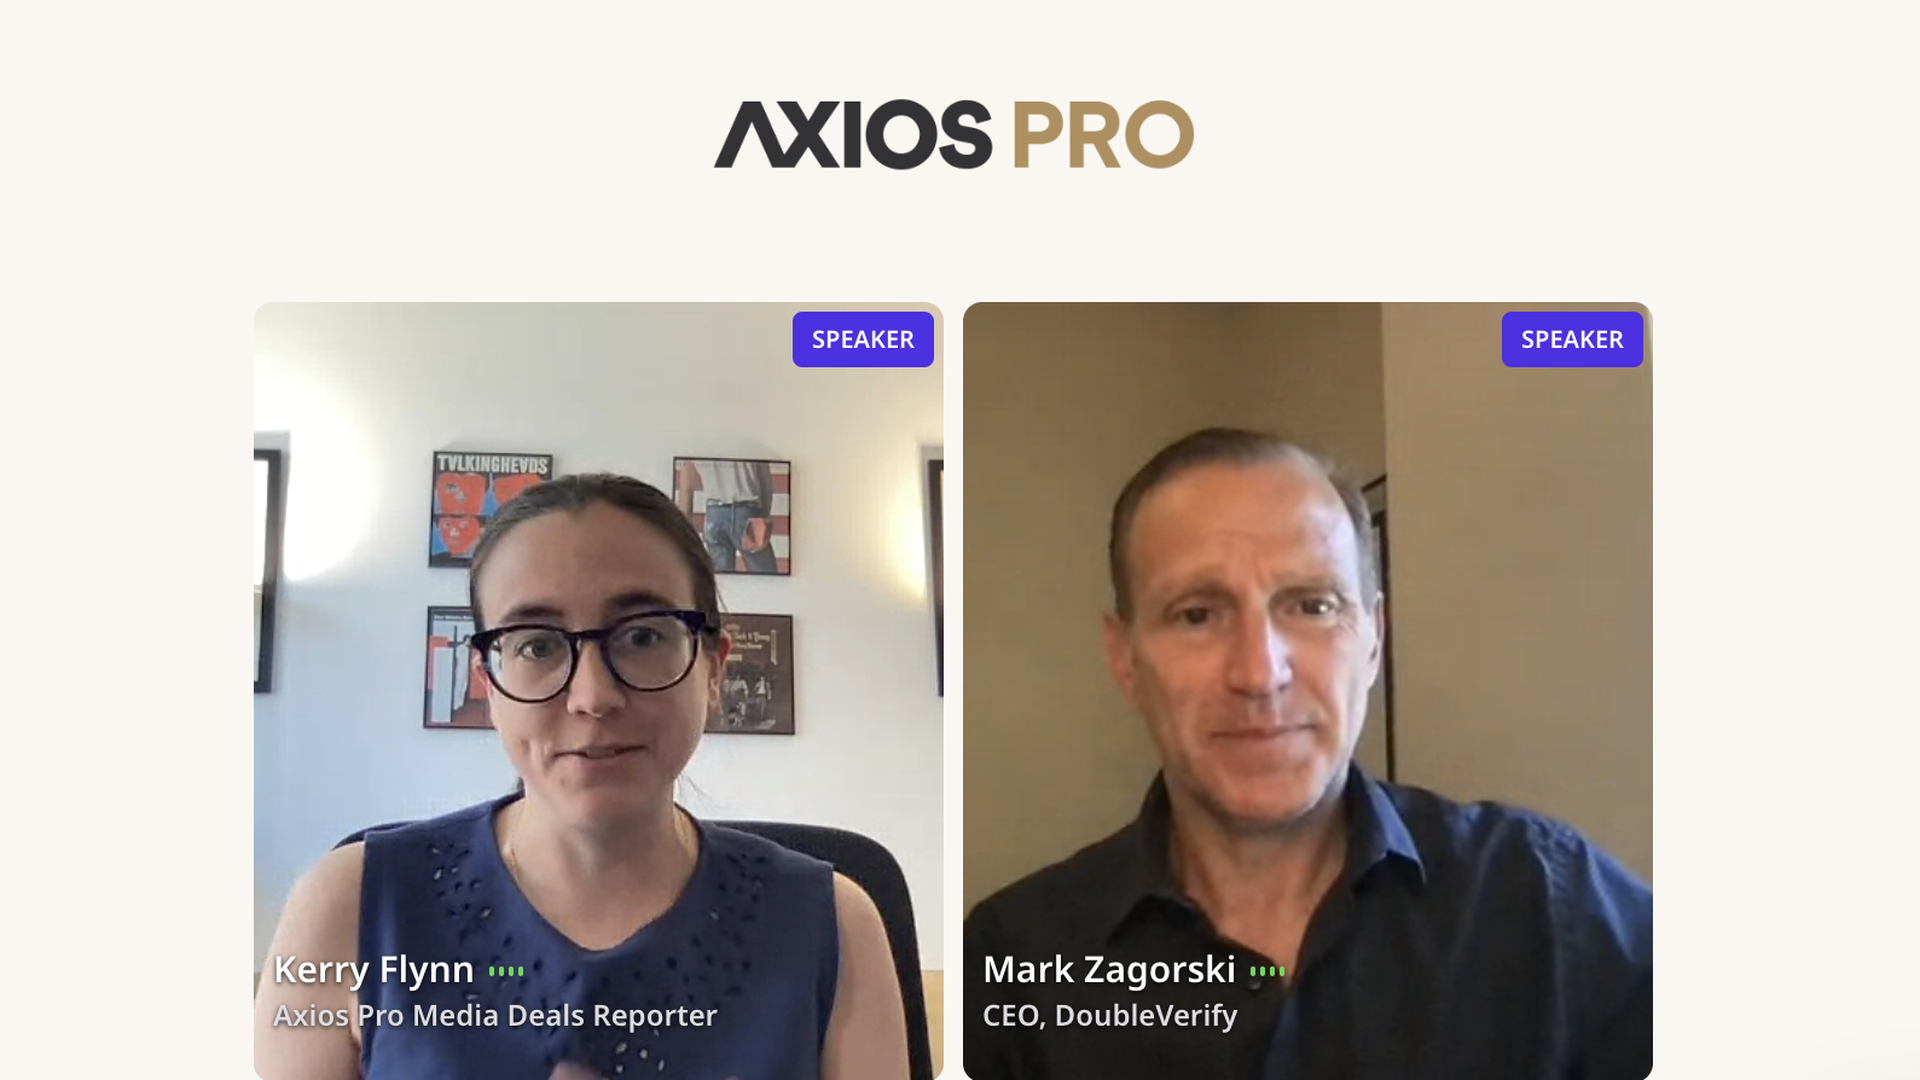 Axios Pro Media Deals Reporter Kerry Flynn and DoubleVerify CEO Mark Zagorski 